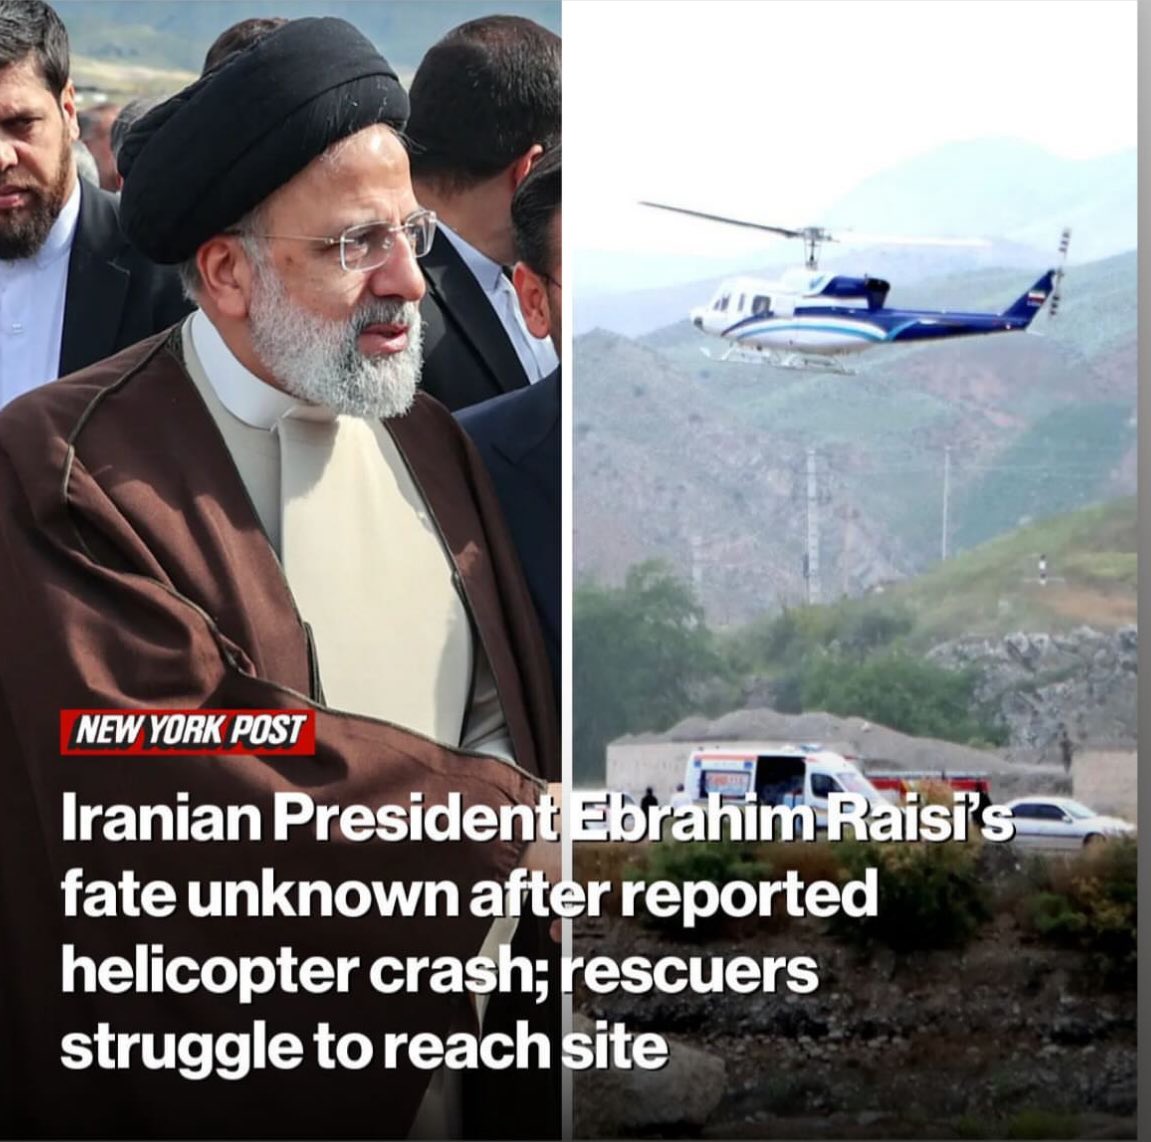 Iranian President Ebrahim Raisi’s fate unknown after reported helicopter crash. Rescuers struggle to reach site. Here’s some friendly advice, don’t make enemies with Israel or an “accident” may just happen. Too bad I’m no coward and they can BRING it the F*C* on!!!!!!